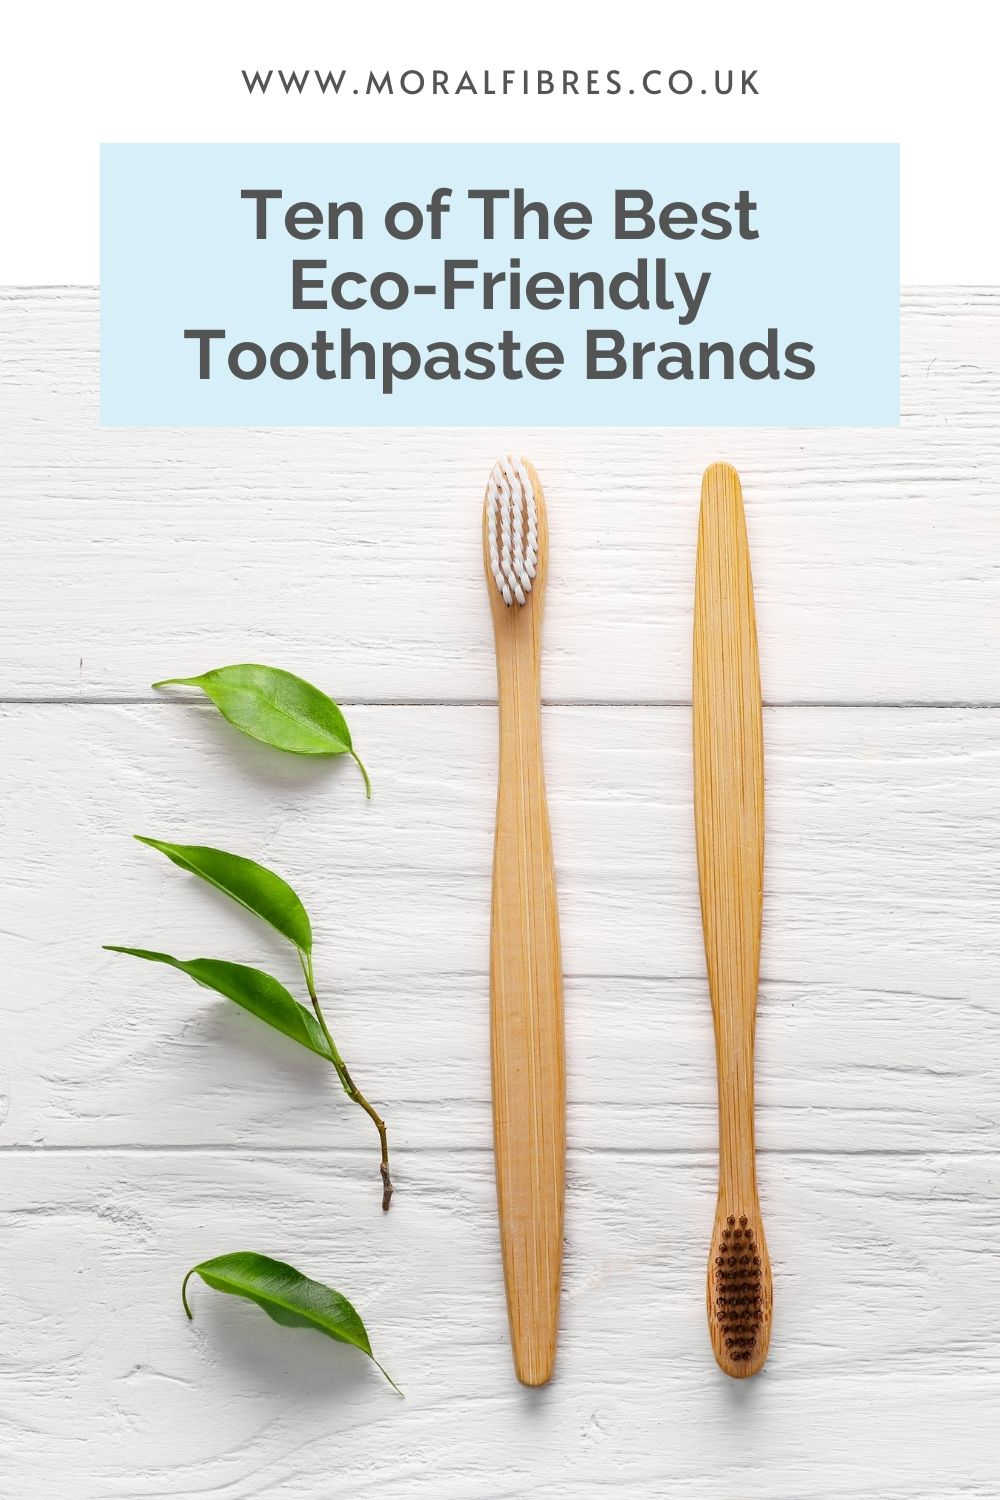 Two wooden toothbrushes with a blue text box that says ten of the best eco-friendly toothpaste brands